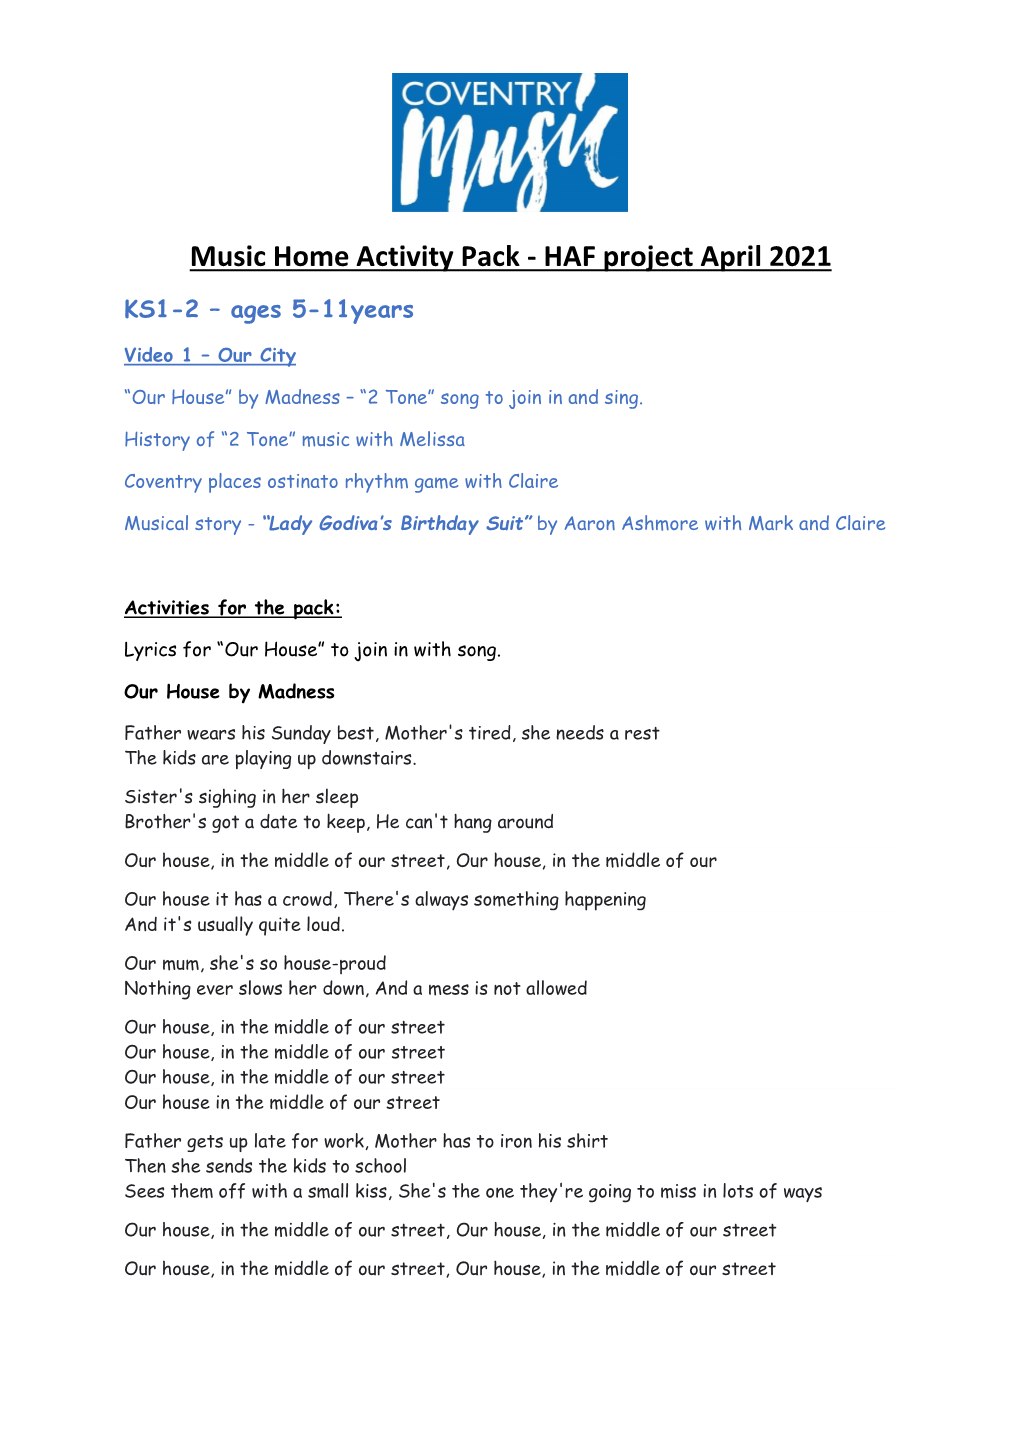 Music Home Activity Pack - HAF Project April 2021